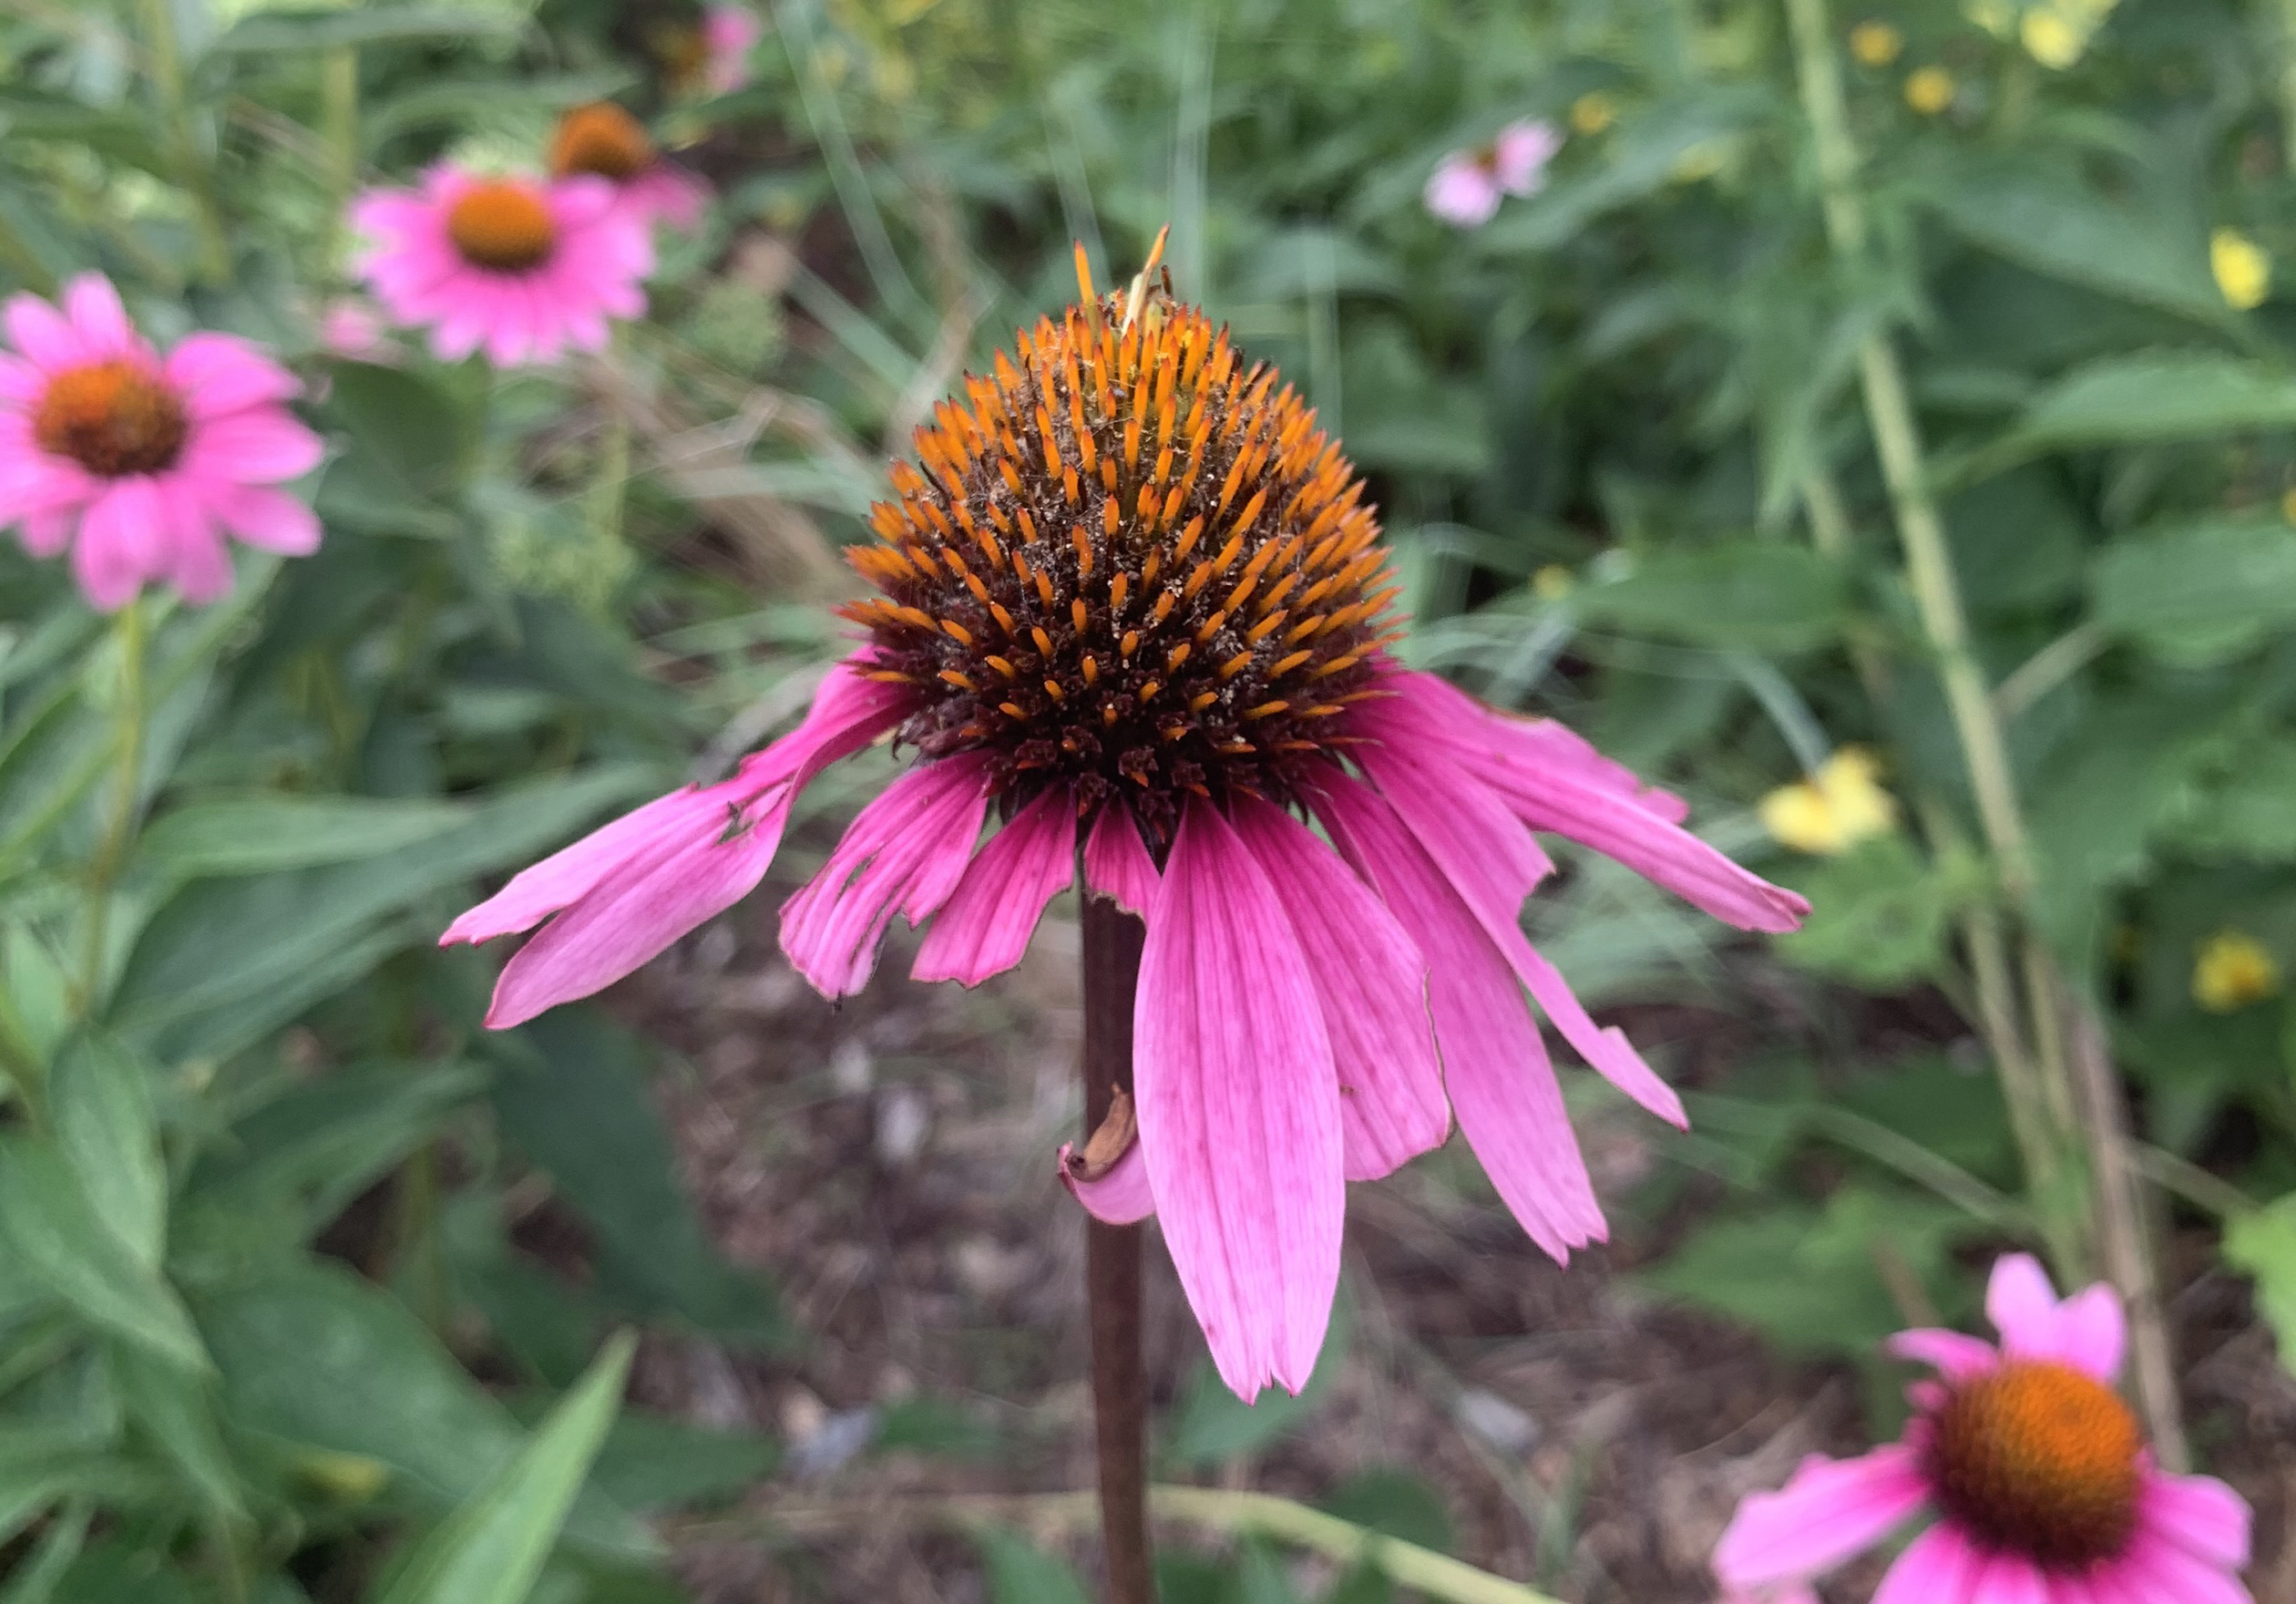 A purple coneflower. The central mound of orange bracts is misshapen due to caterpillar damage.